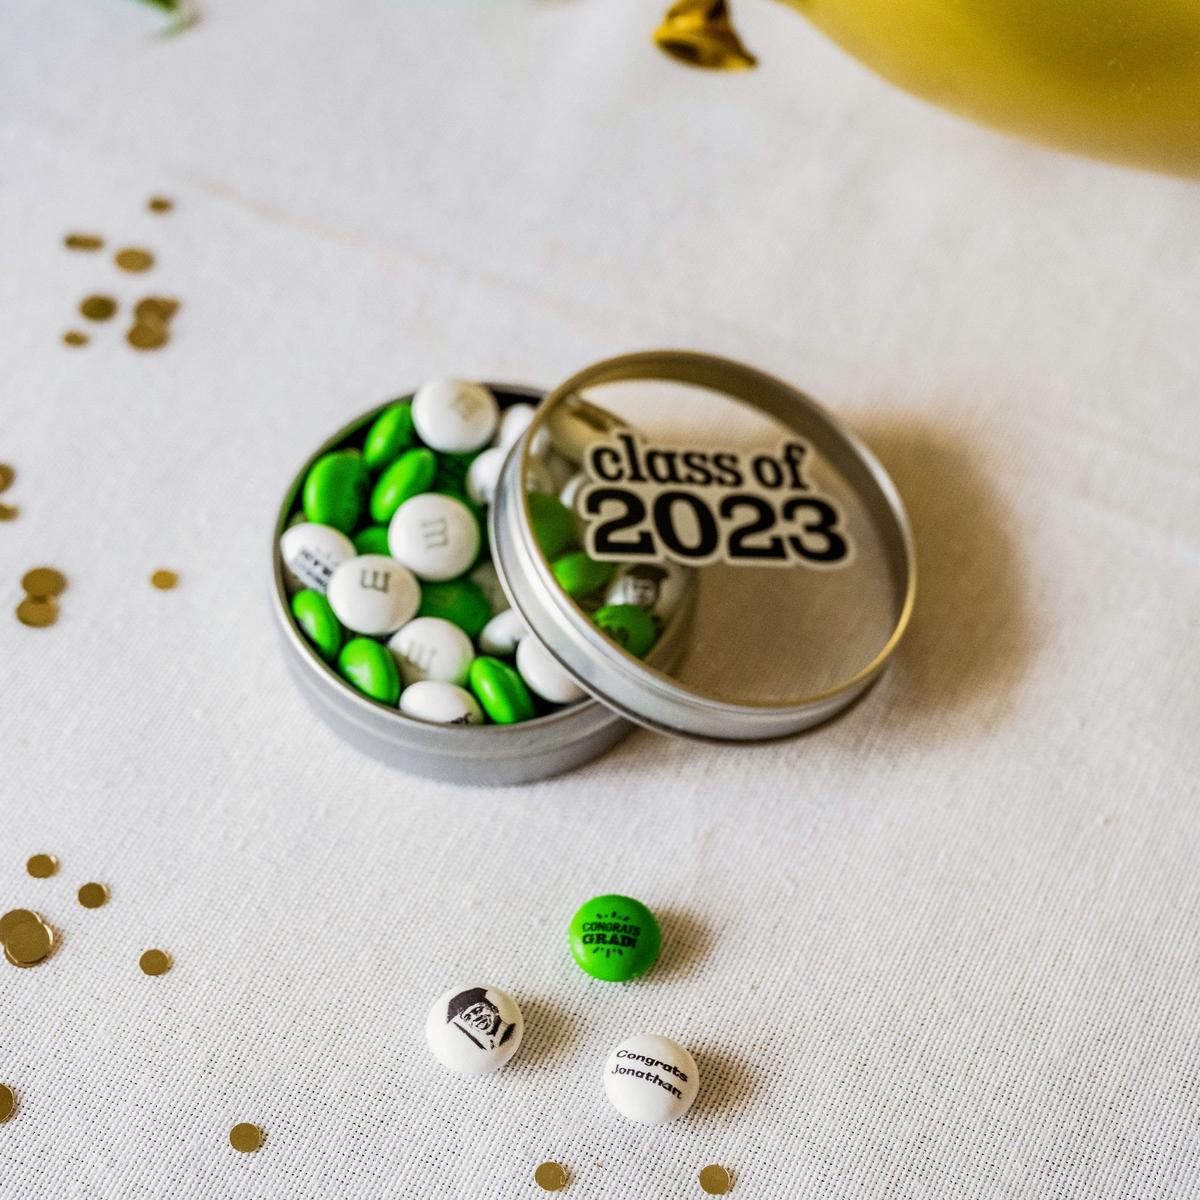 These new mom, grad and dad 2023 gifts from M&M's are sweet and